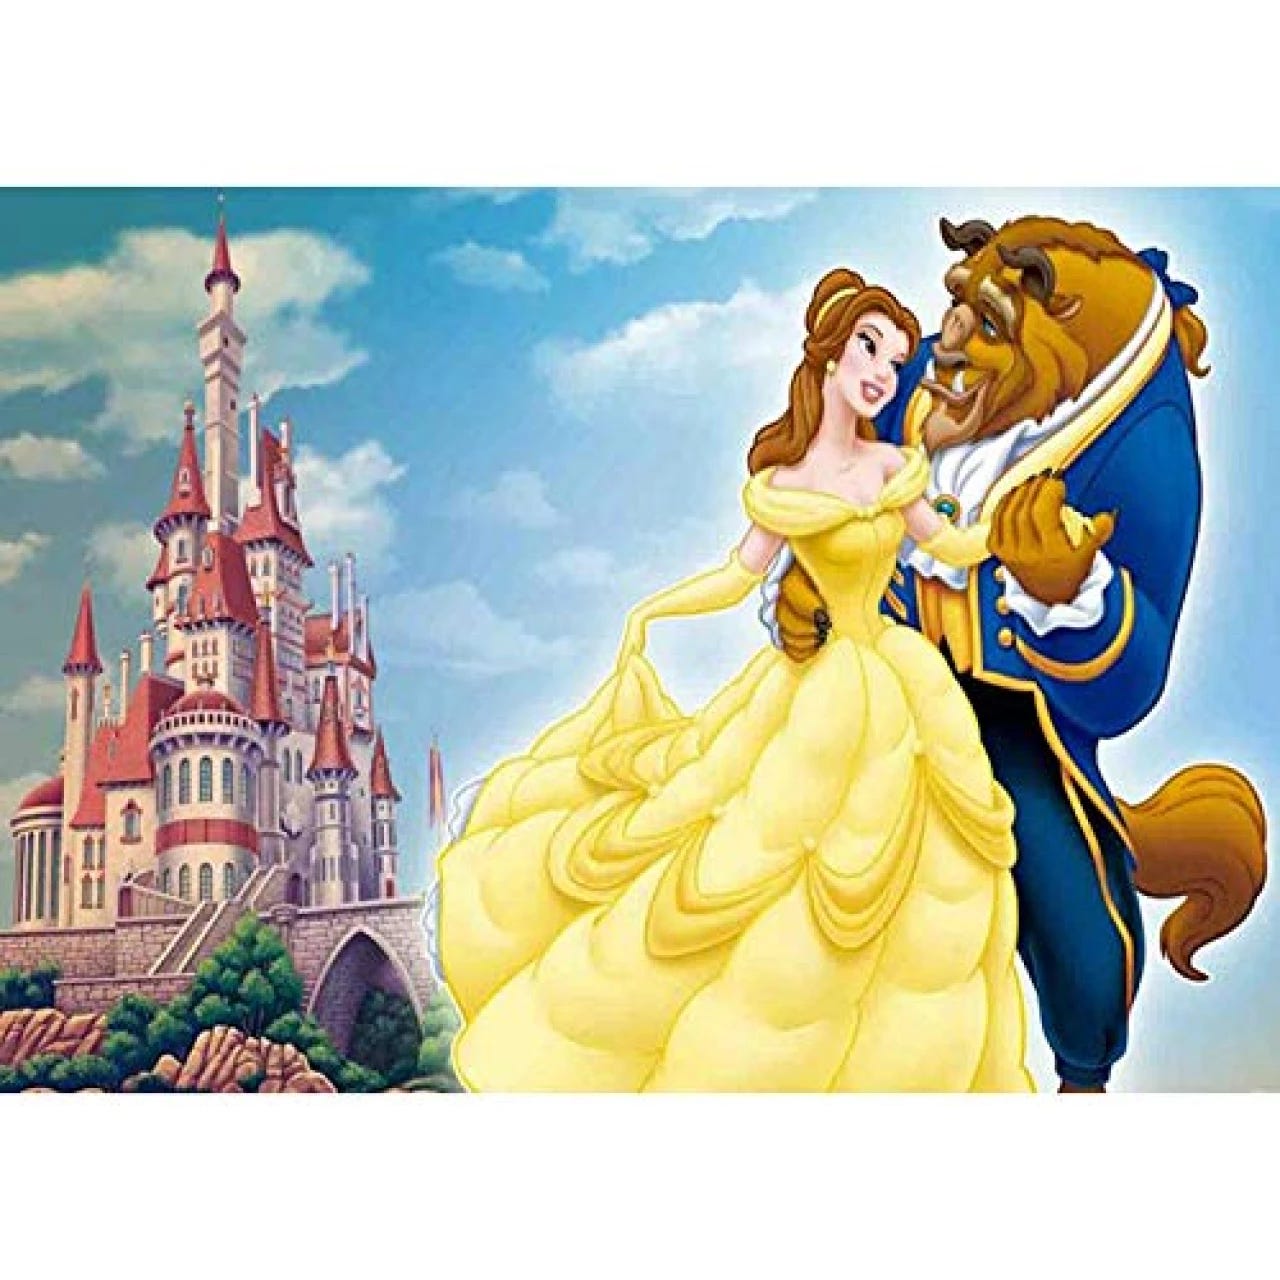  ACANDYL Paint by Number Stitch DIY Painting Paint by Number  Kits for Kids Adults Beginner Disney DIY Canvas Painting by Numbers Acrylic  Painting Arts Craft for Home Decoration Disney Stitch 16x20